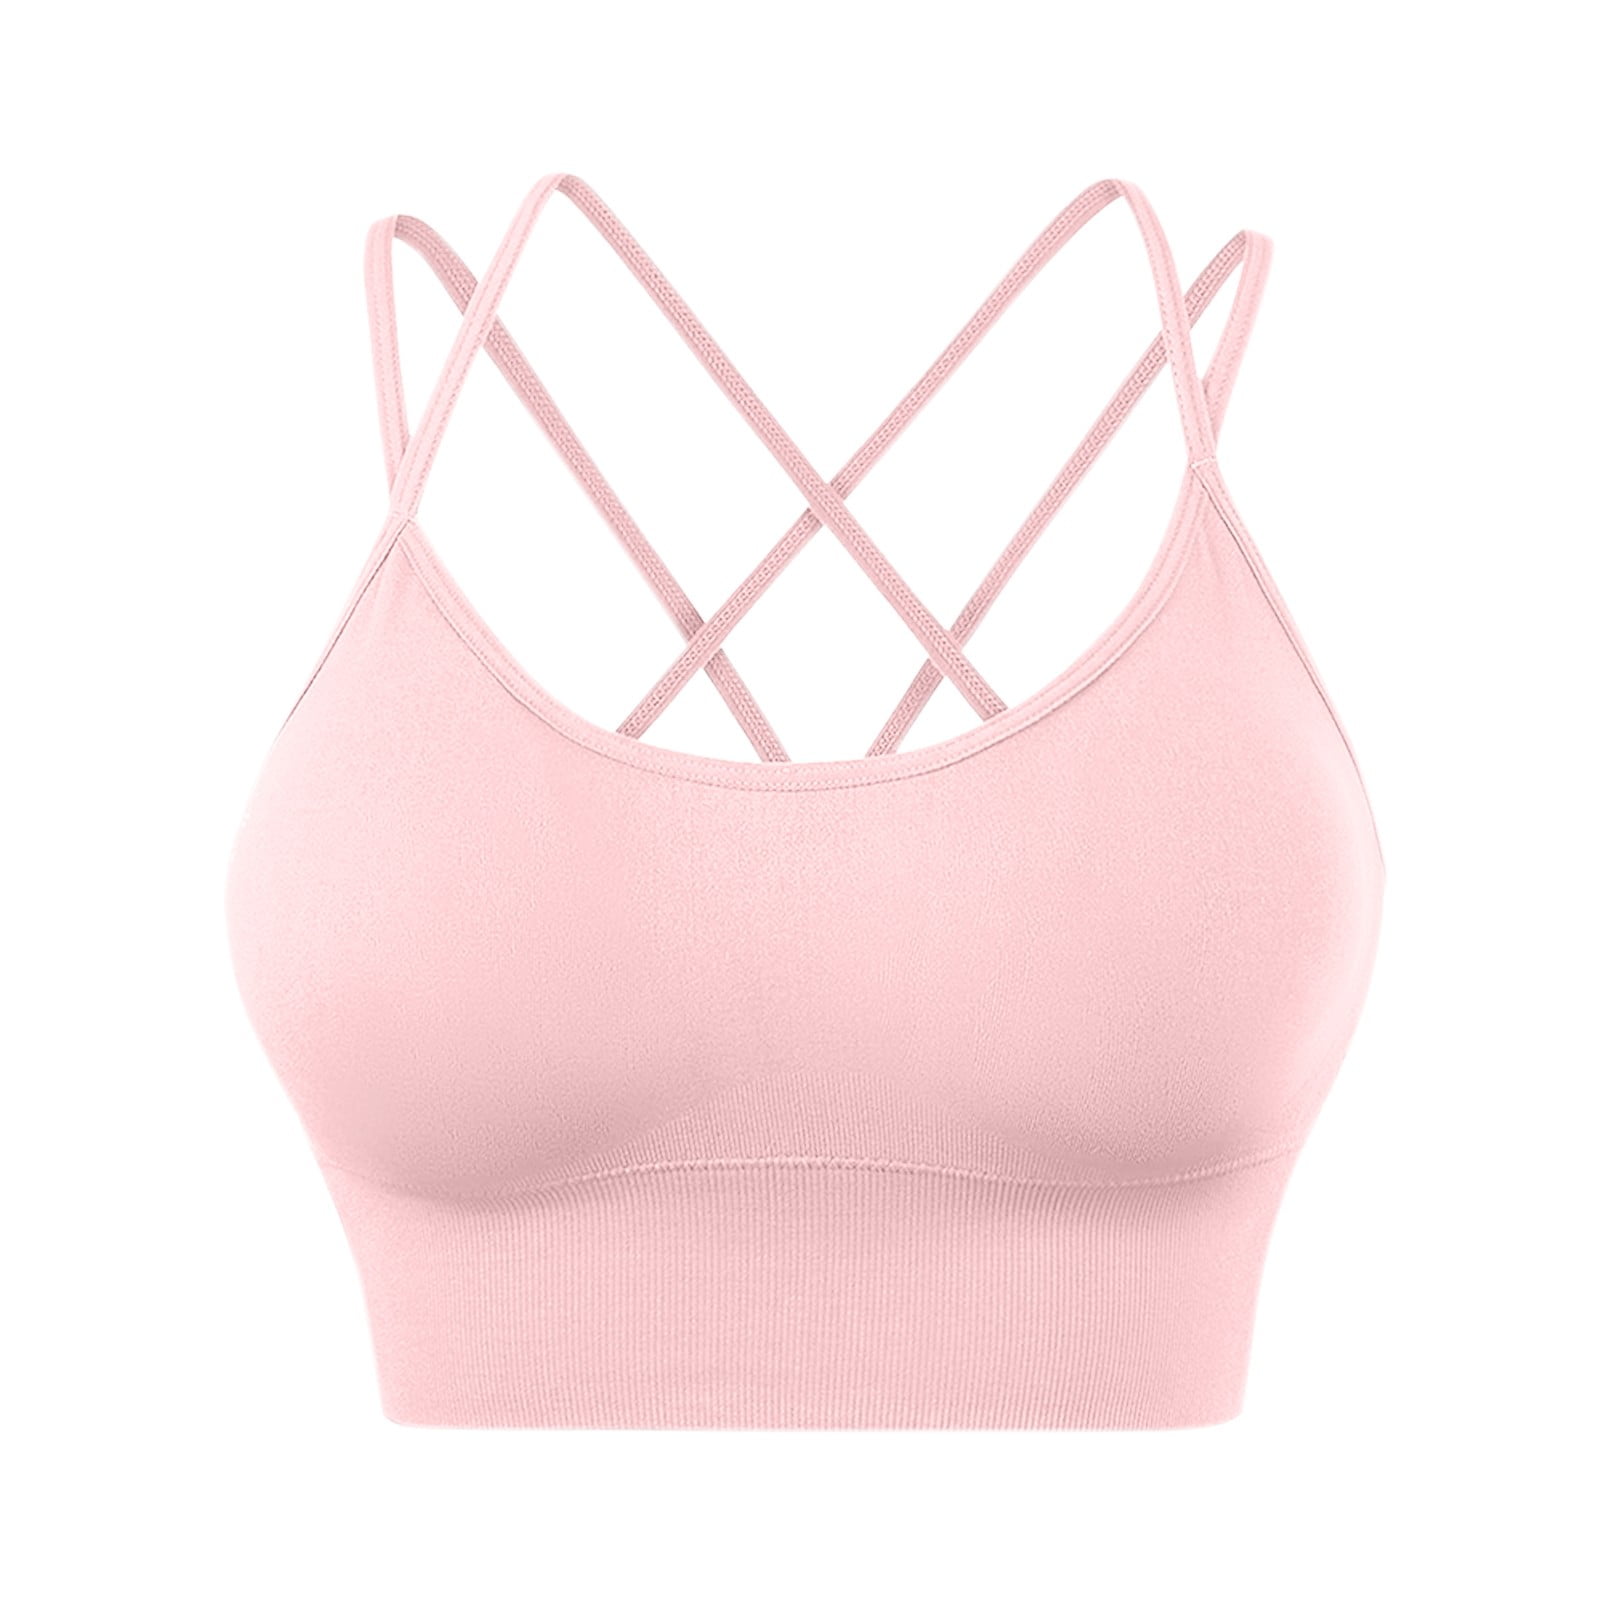 Fsqjgq Womens Sport Bras Back Strappy Push Up Padded Crop Top Workout  Fitness Running Yoga Bra Solid Seamless Breathable Brassiere Vest Pink M